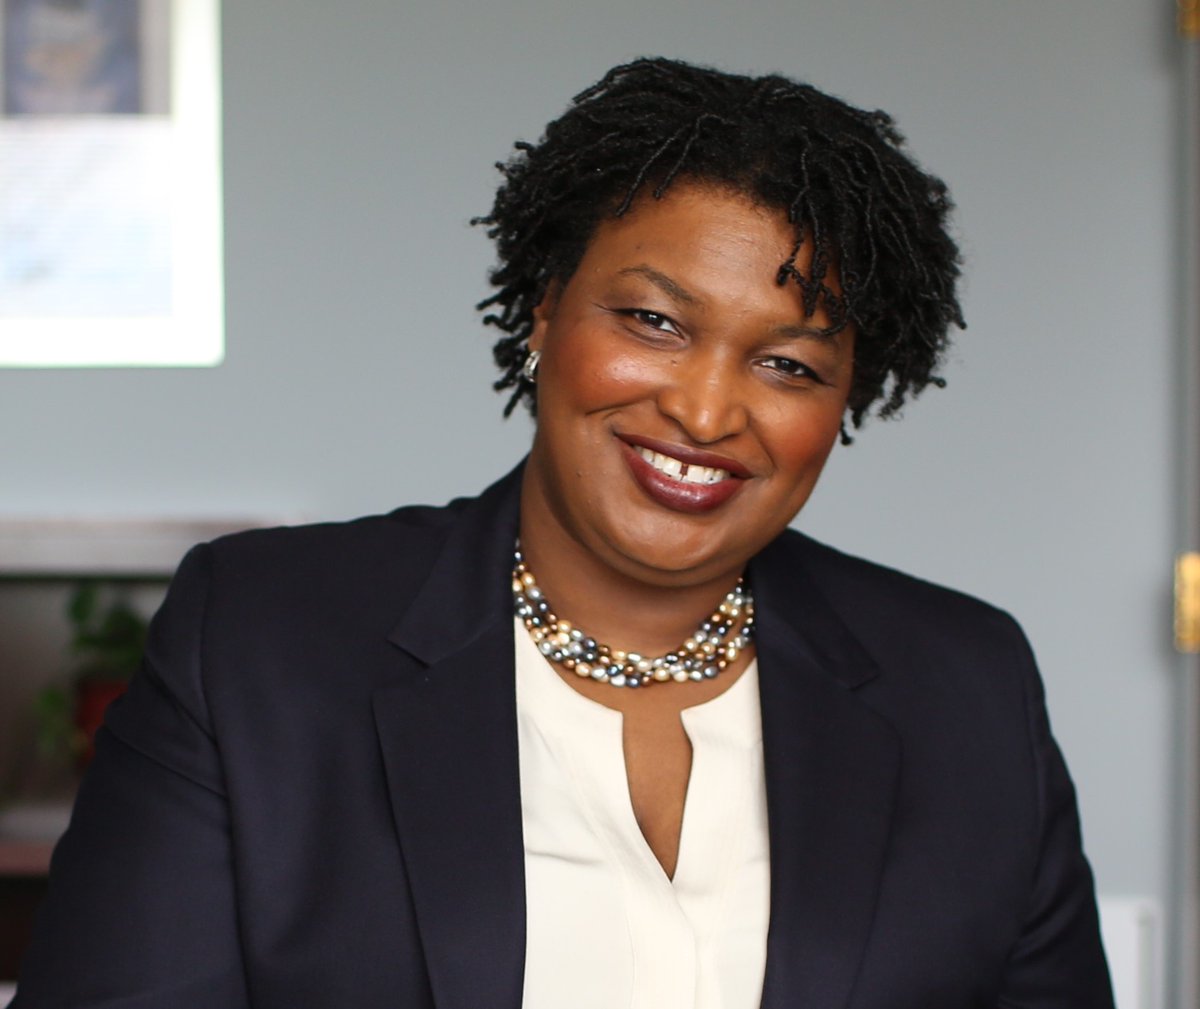 . @staceyabrams, who formerly served as the Democratic leader in the Georgia House of Representatives, founded  @NewGAProject and  @fairfightaction to address voter suppression and educate Georgians about elections and voter rights.  #WCW